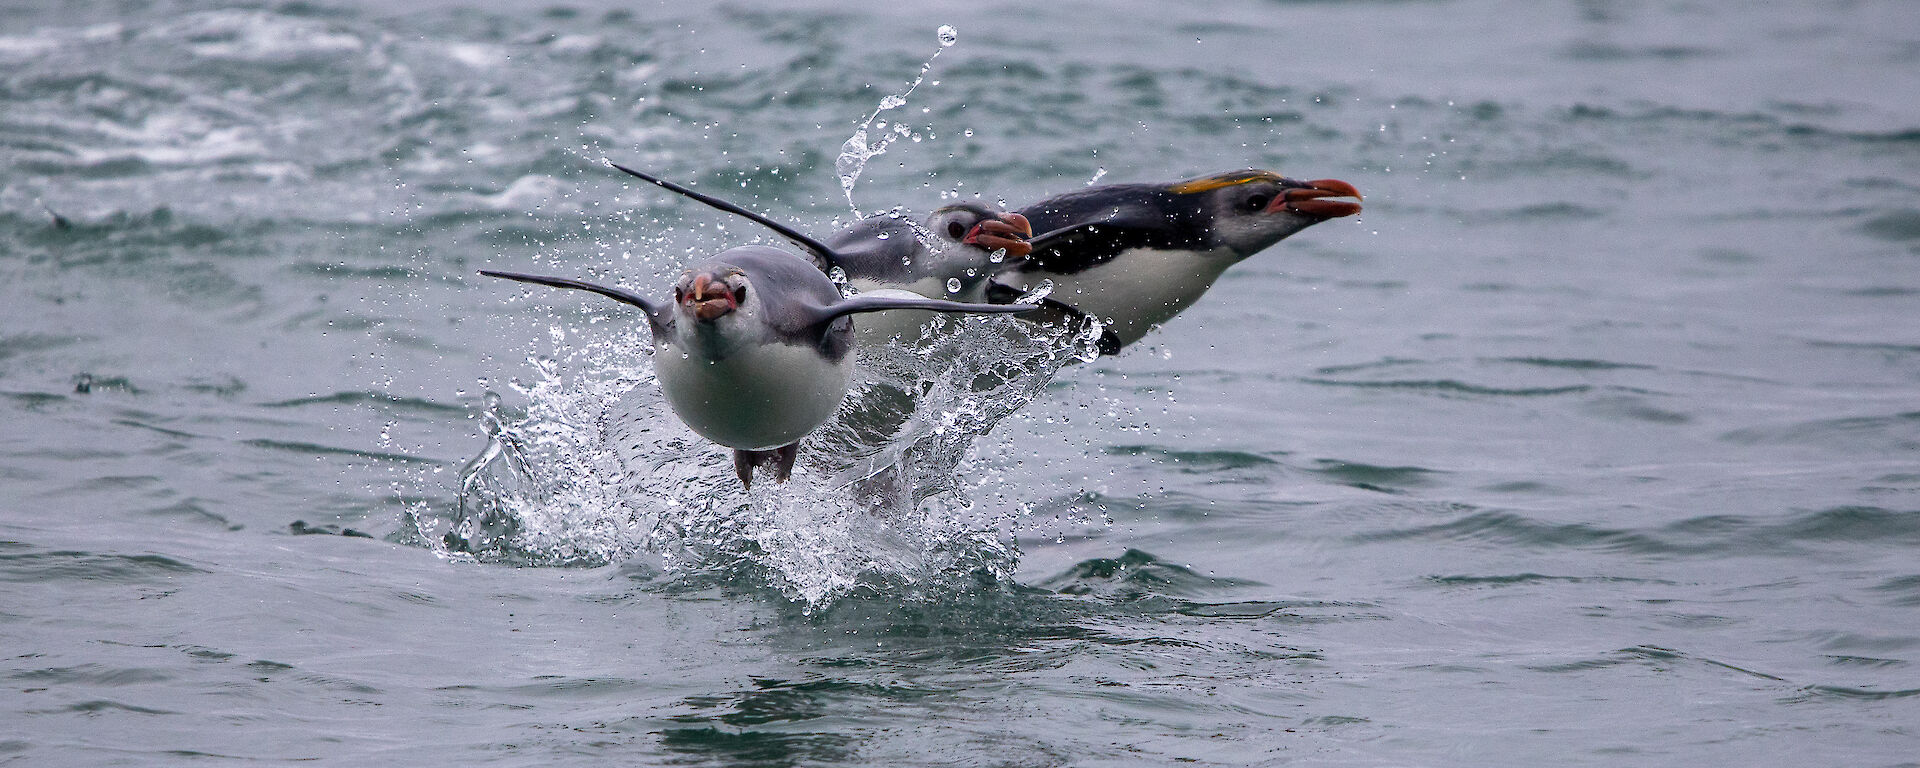 3 royal penguins jumping out of the water as they swim back into shore.